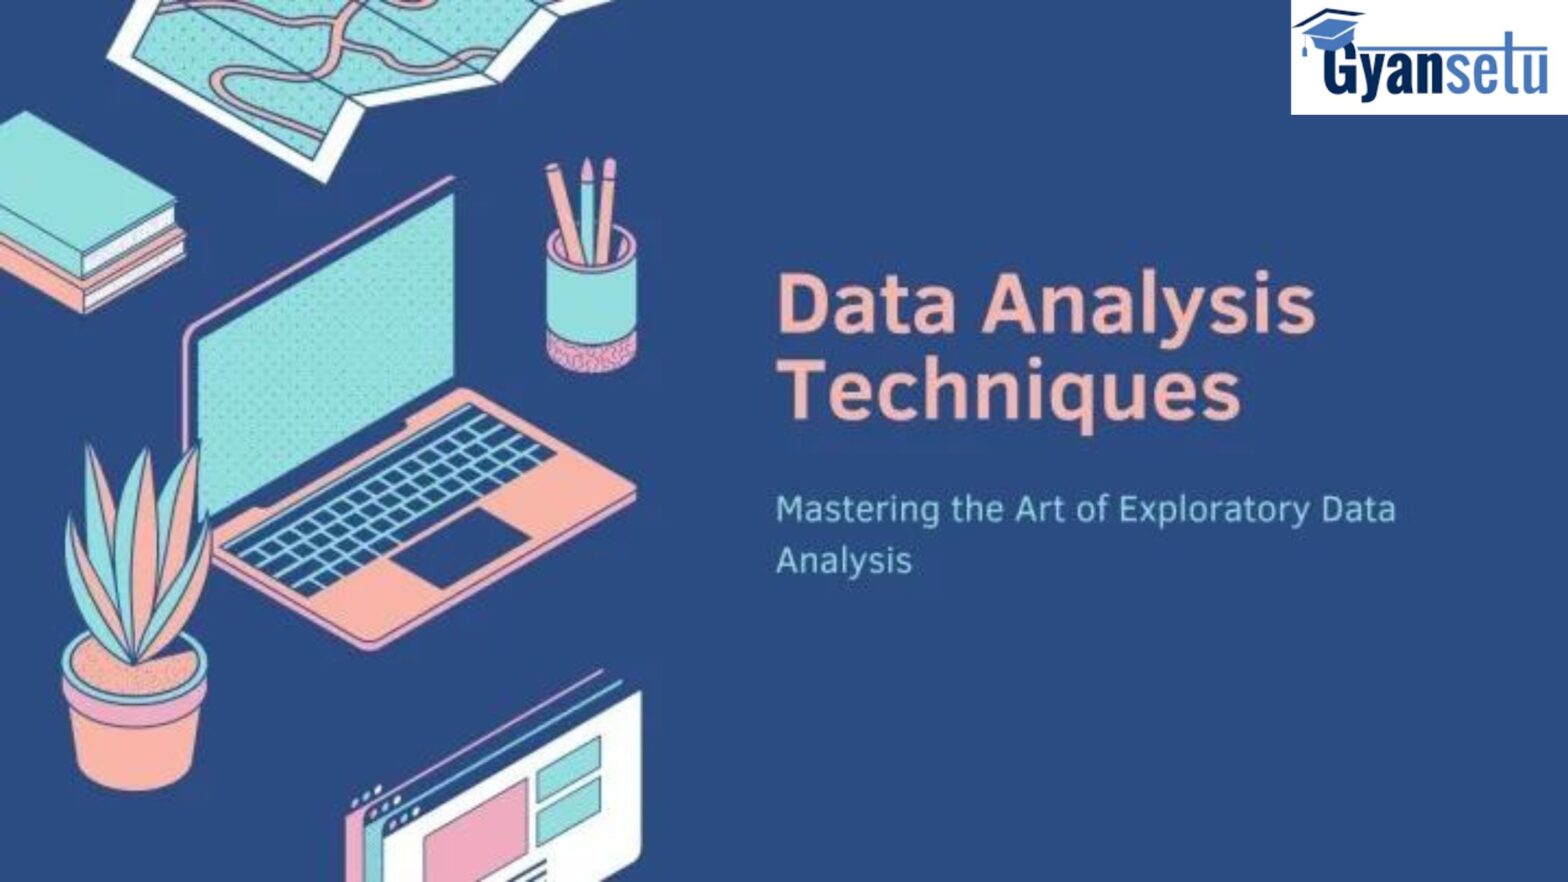 What is Data Analysis